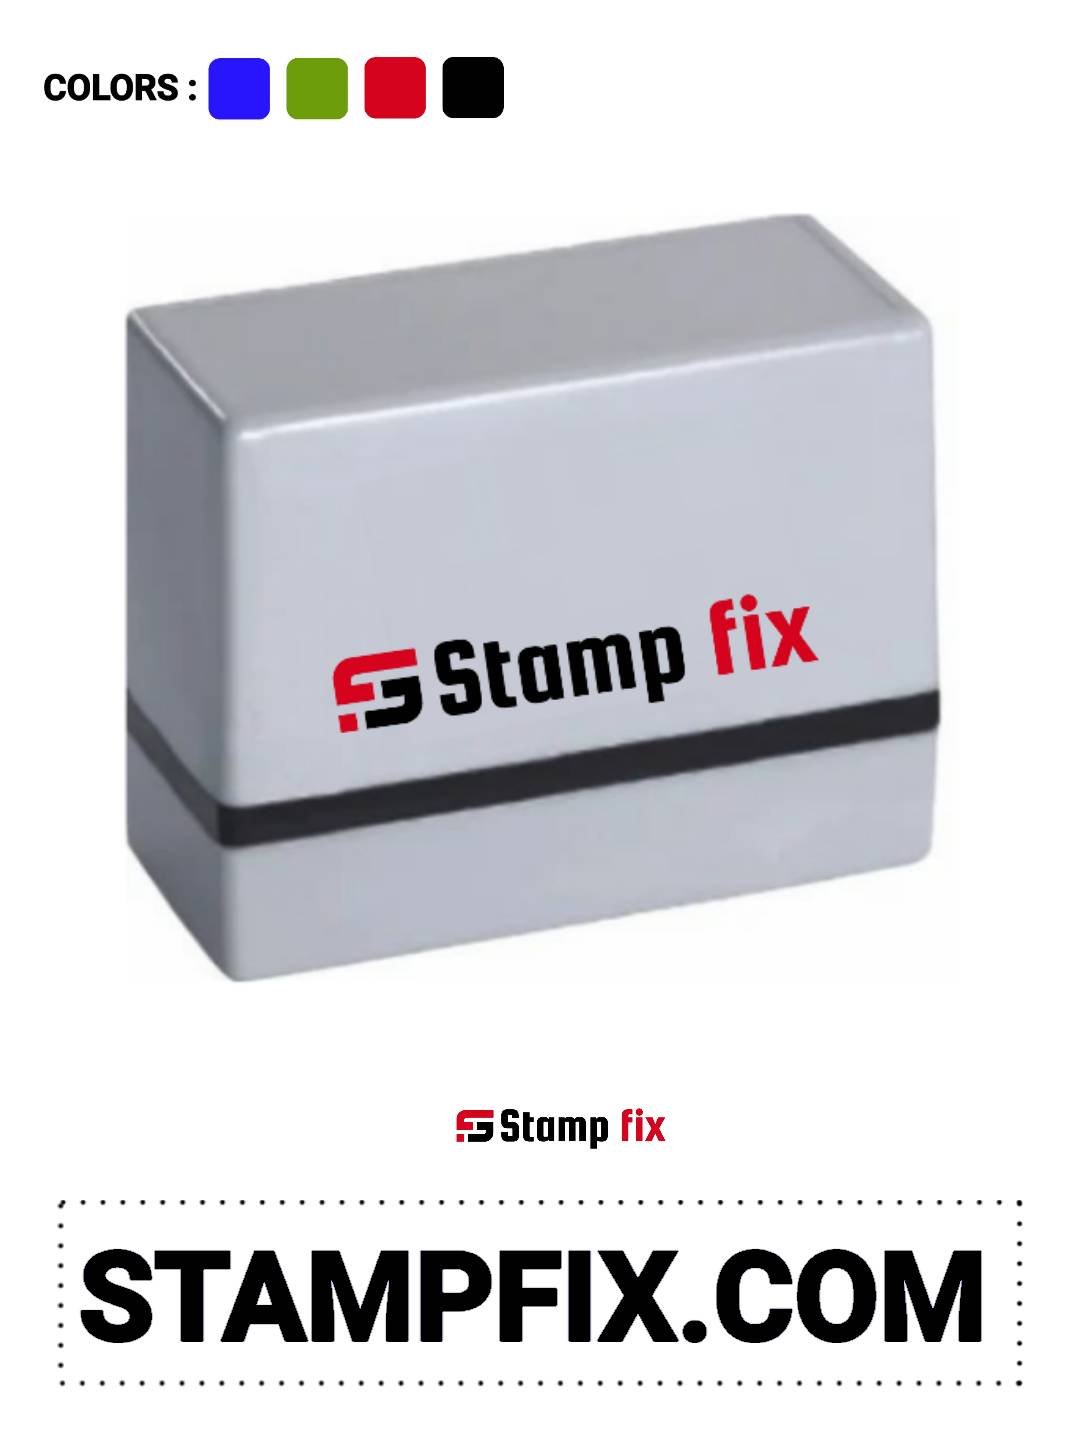 Pre Ink name stamp, personal stamp, executive stamp, owner stamp, director stamp, patner stamp , firm stamp, easy stamp, shop stamp, business marking stamp, Stamp by StampFix, a self-inking stamp with high-quality impressions
in India, nylon stamp, rubber stamp, pre ink stamp, polymer stamp, urgent stamp